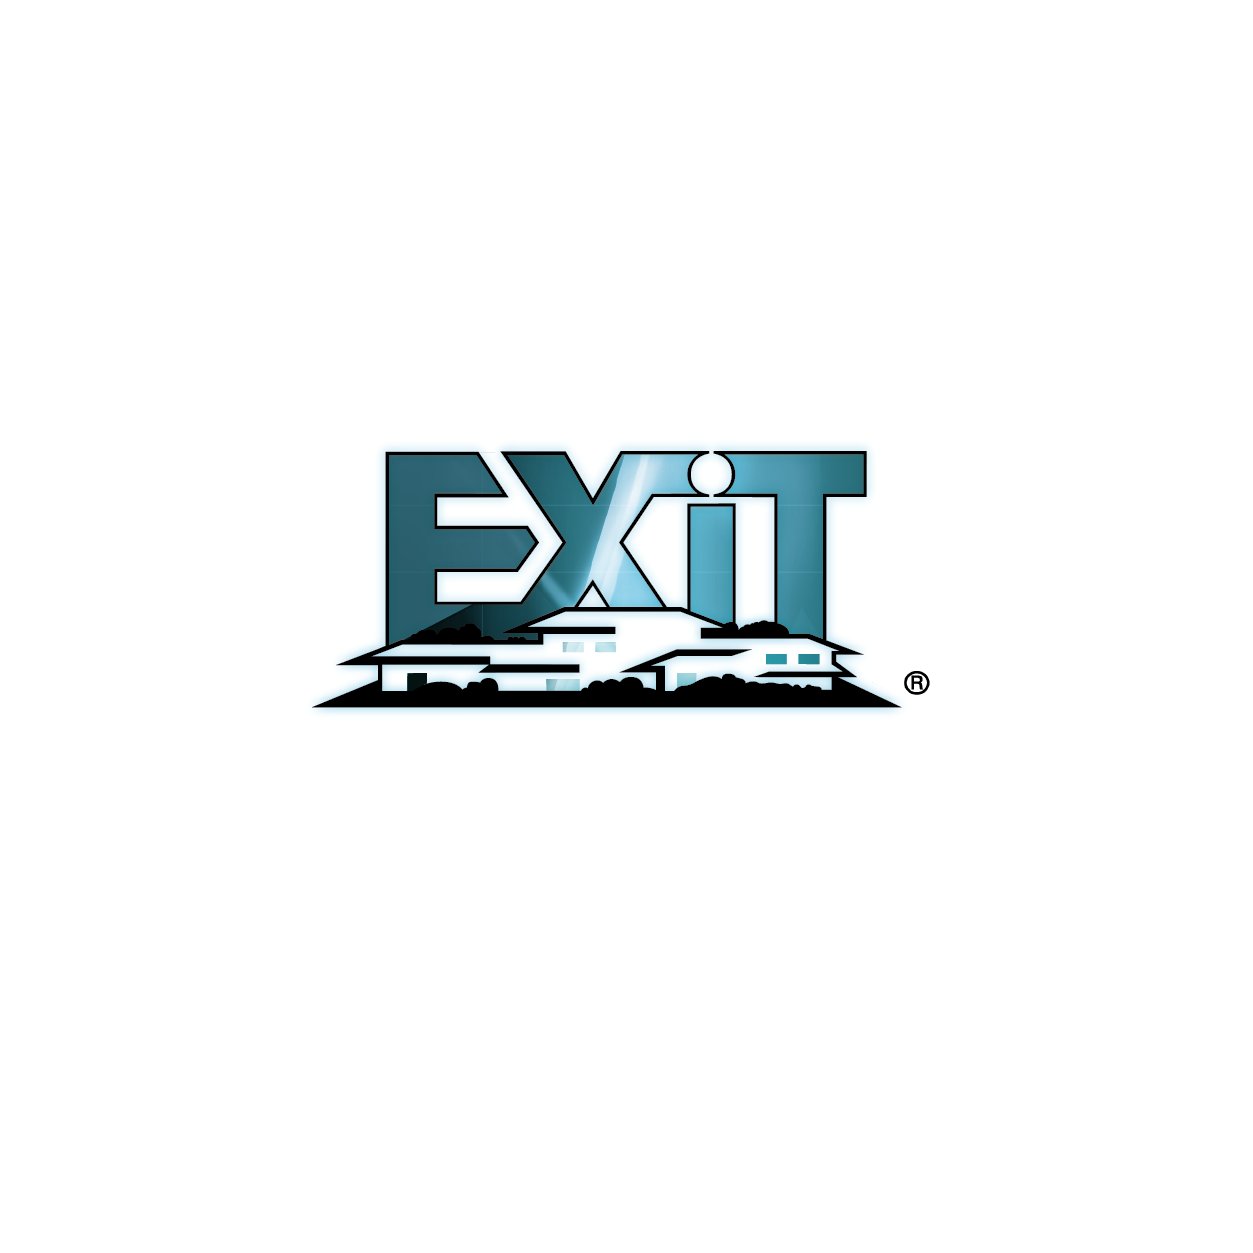 EXIT Realty Seaway is a real estate brokerage serving Cornwall and surrounding areas for over 25 years.